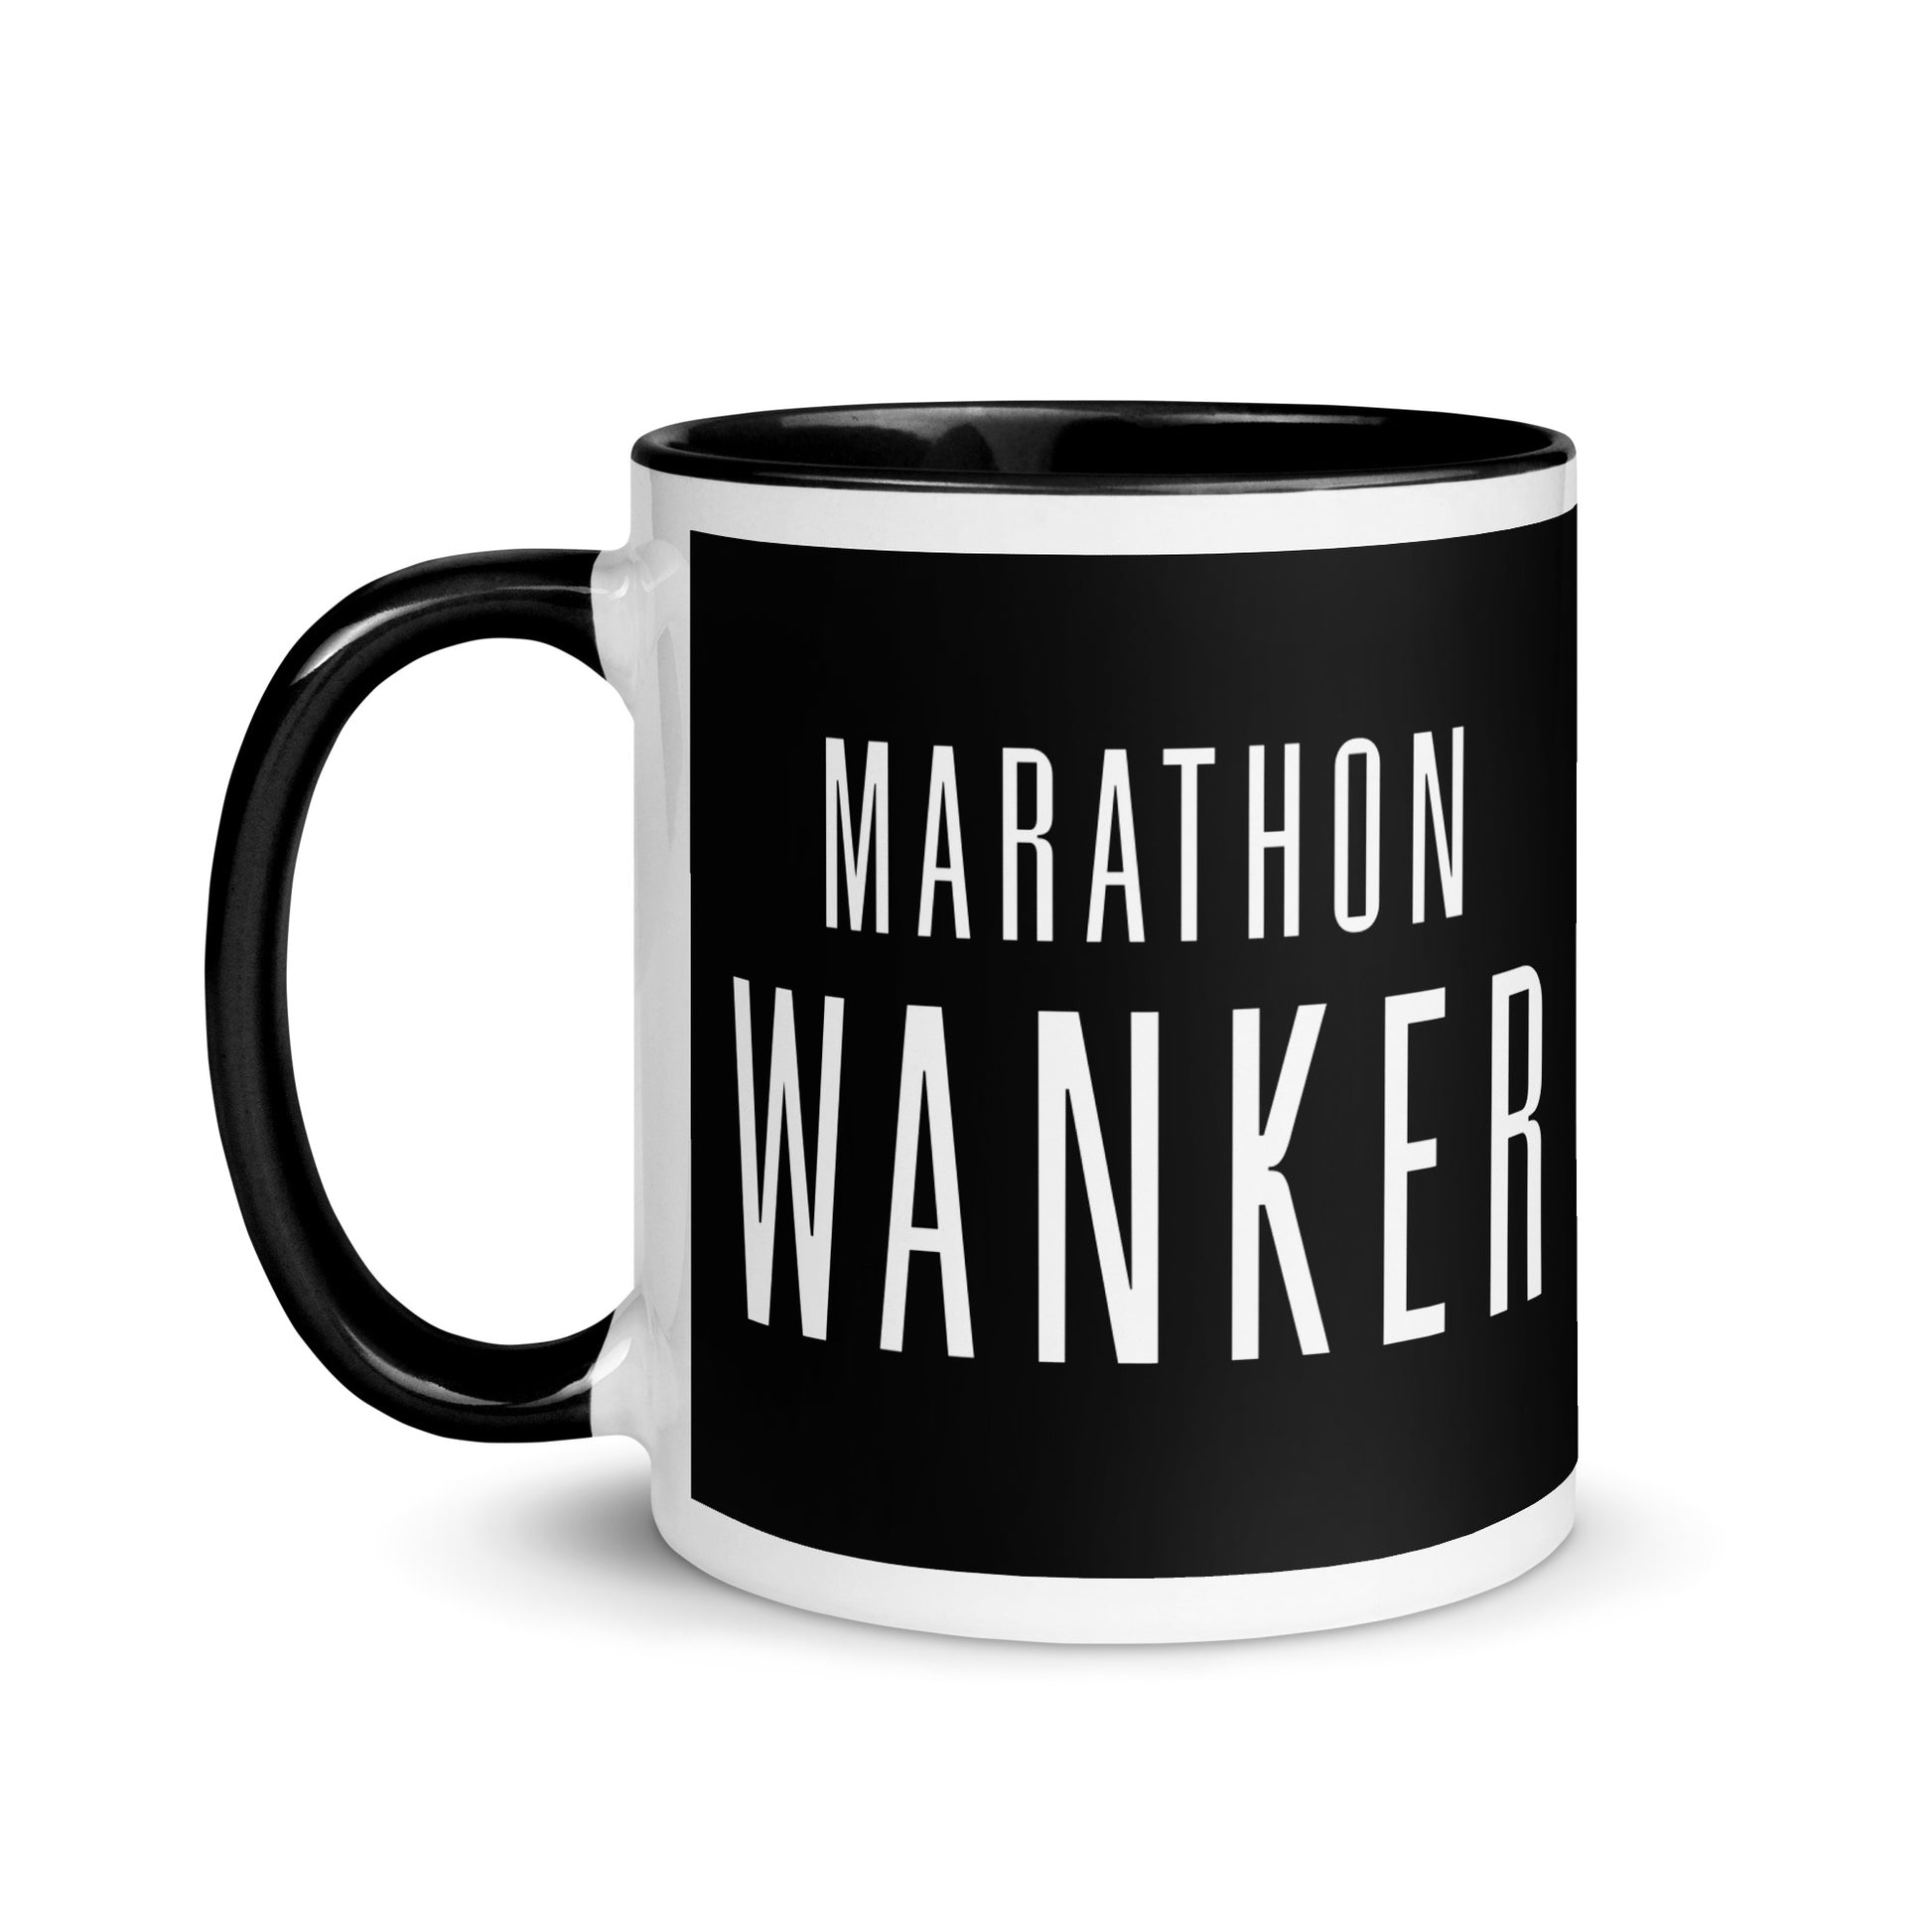 white and black mug with the words marathon wanker in a bold, white font on a black background. the mug has a black handle and inside